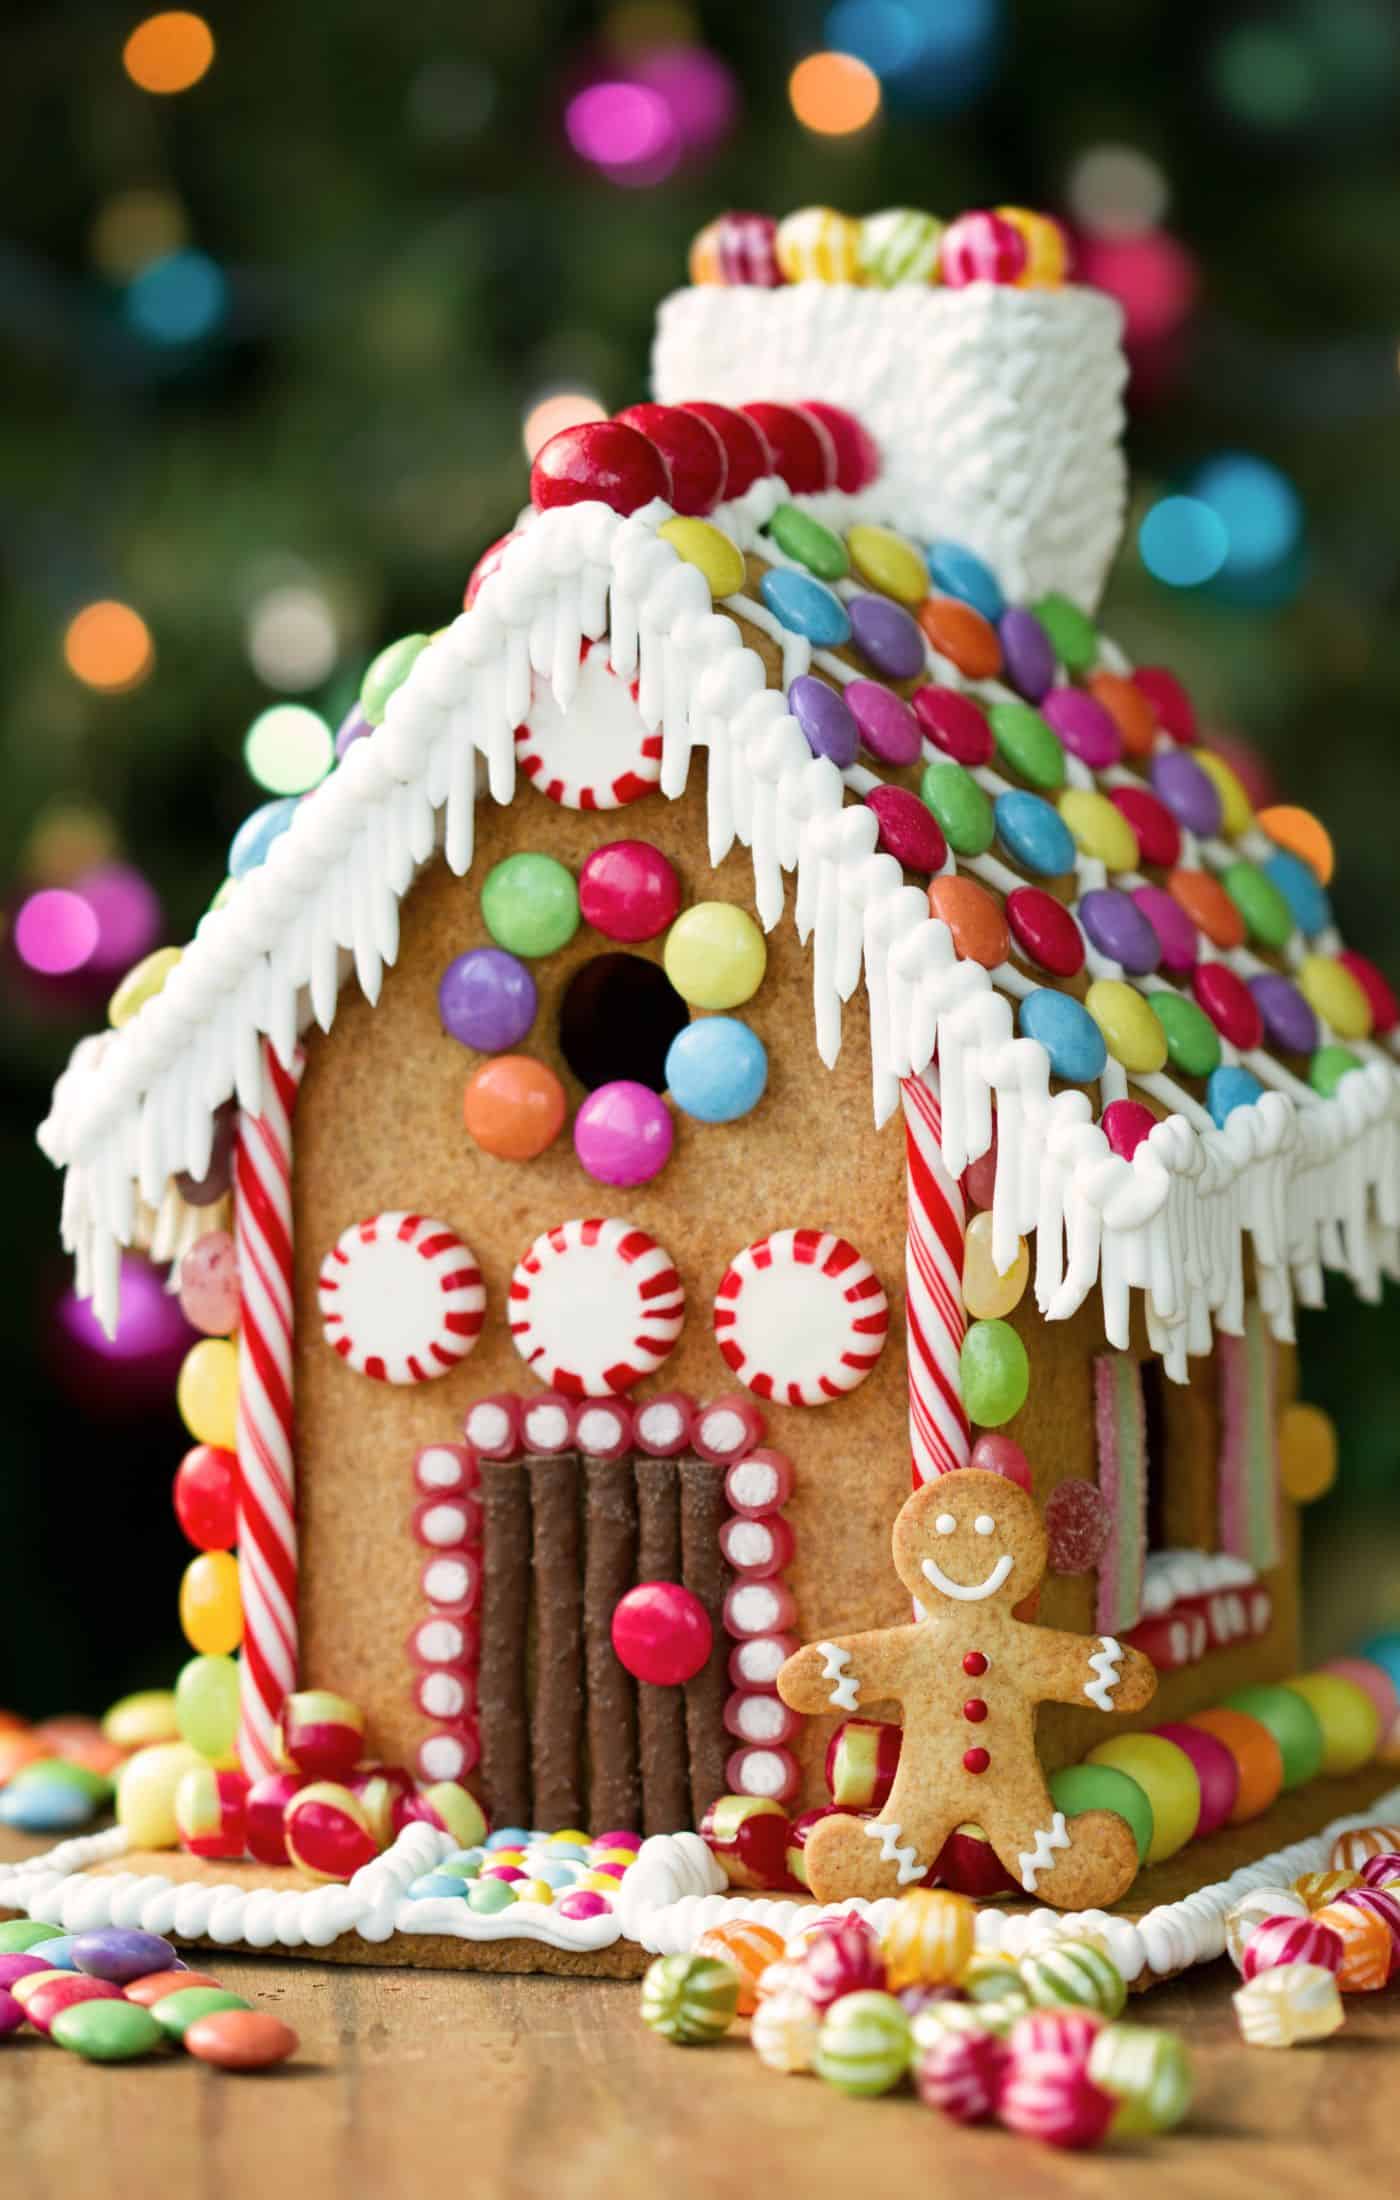 Smarties on classic colorful christmas gingerbread house